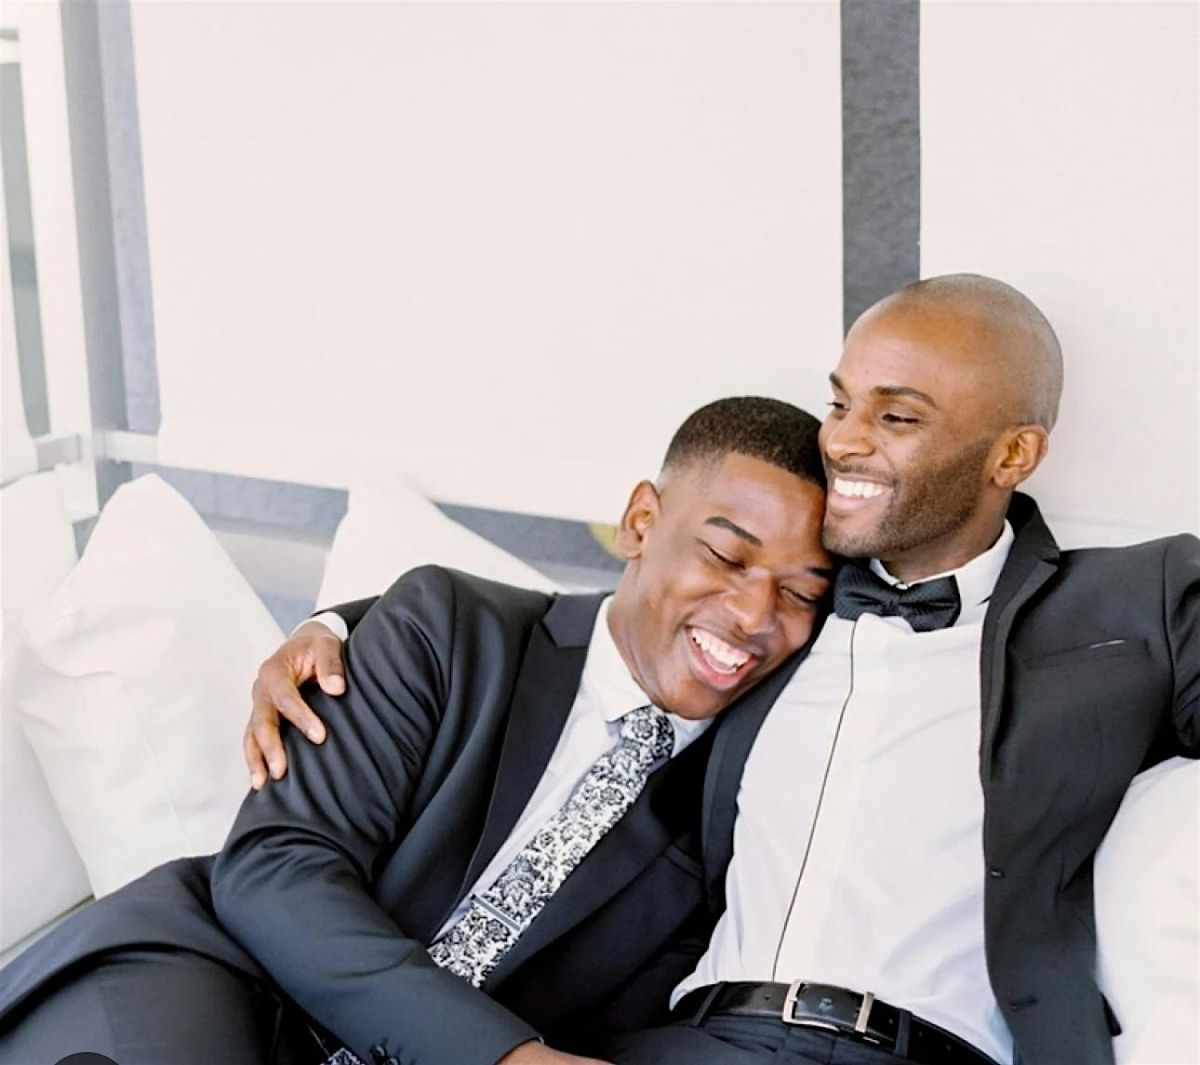 Black Gay Speed Dating (Ages 25-42)Central London